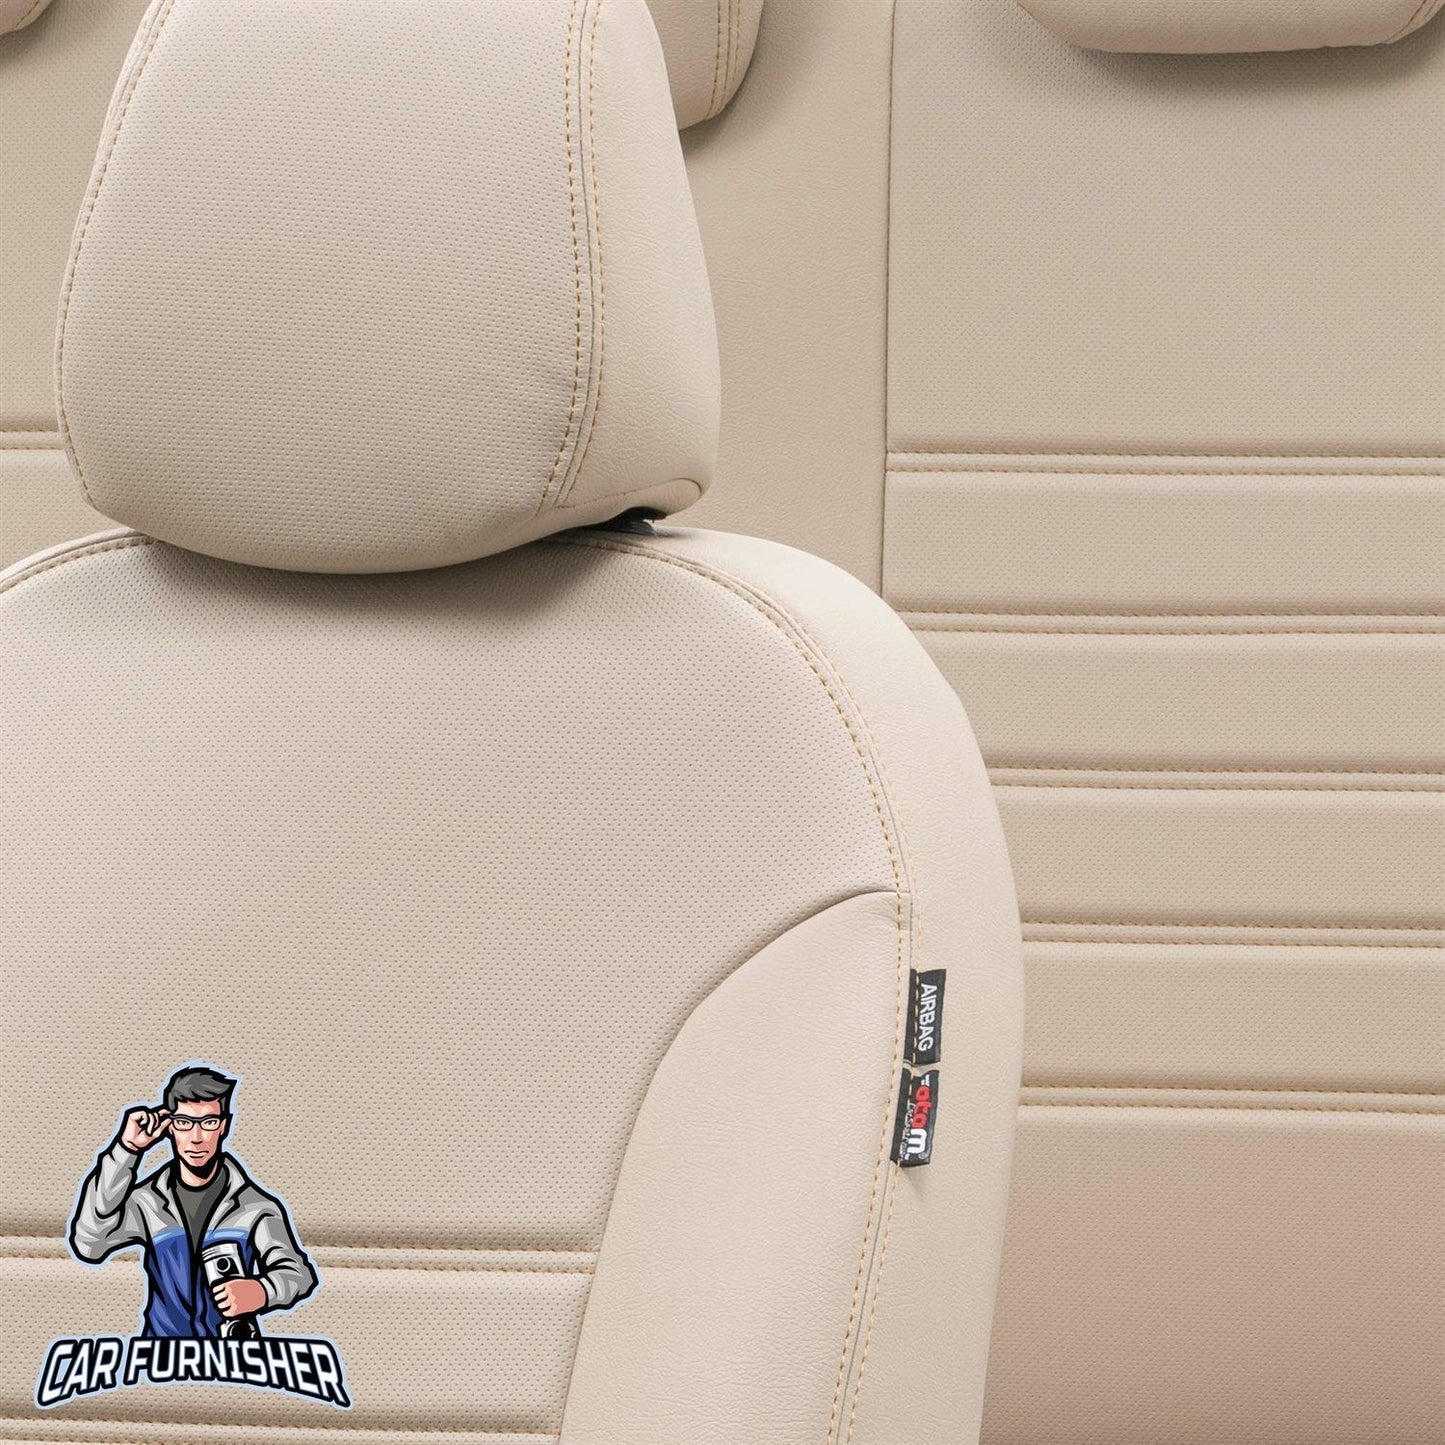 Peugeot 108 Seat Cover Istanbul Leather Design Beige Leather